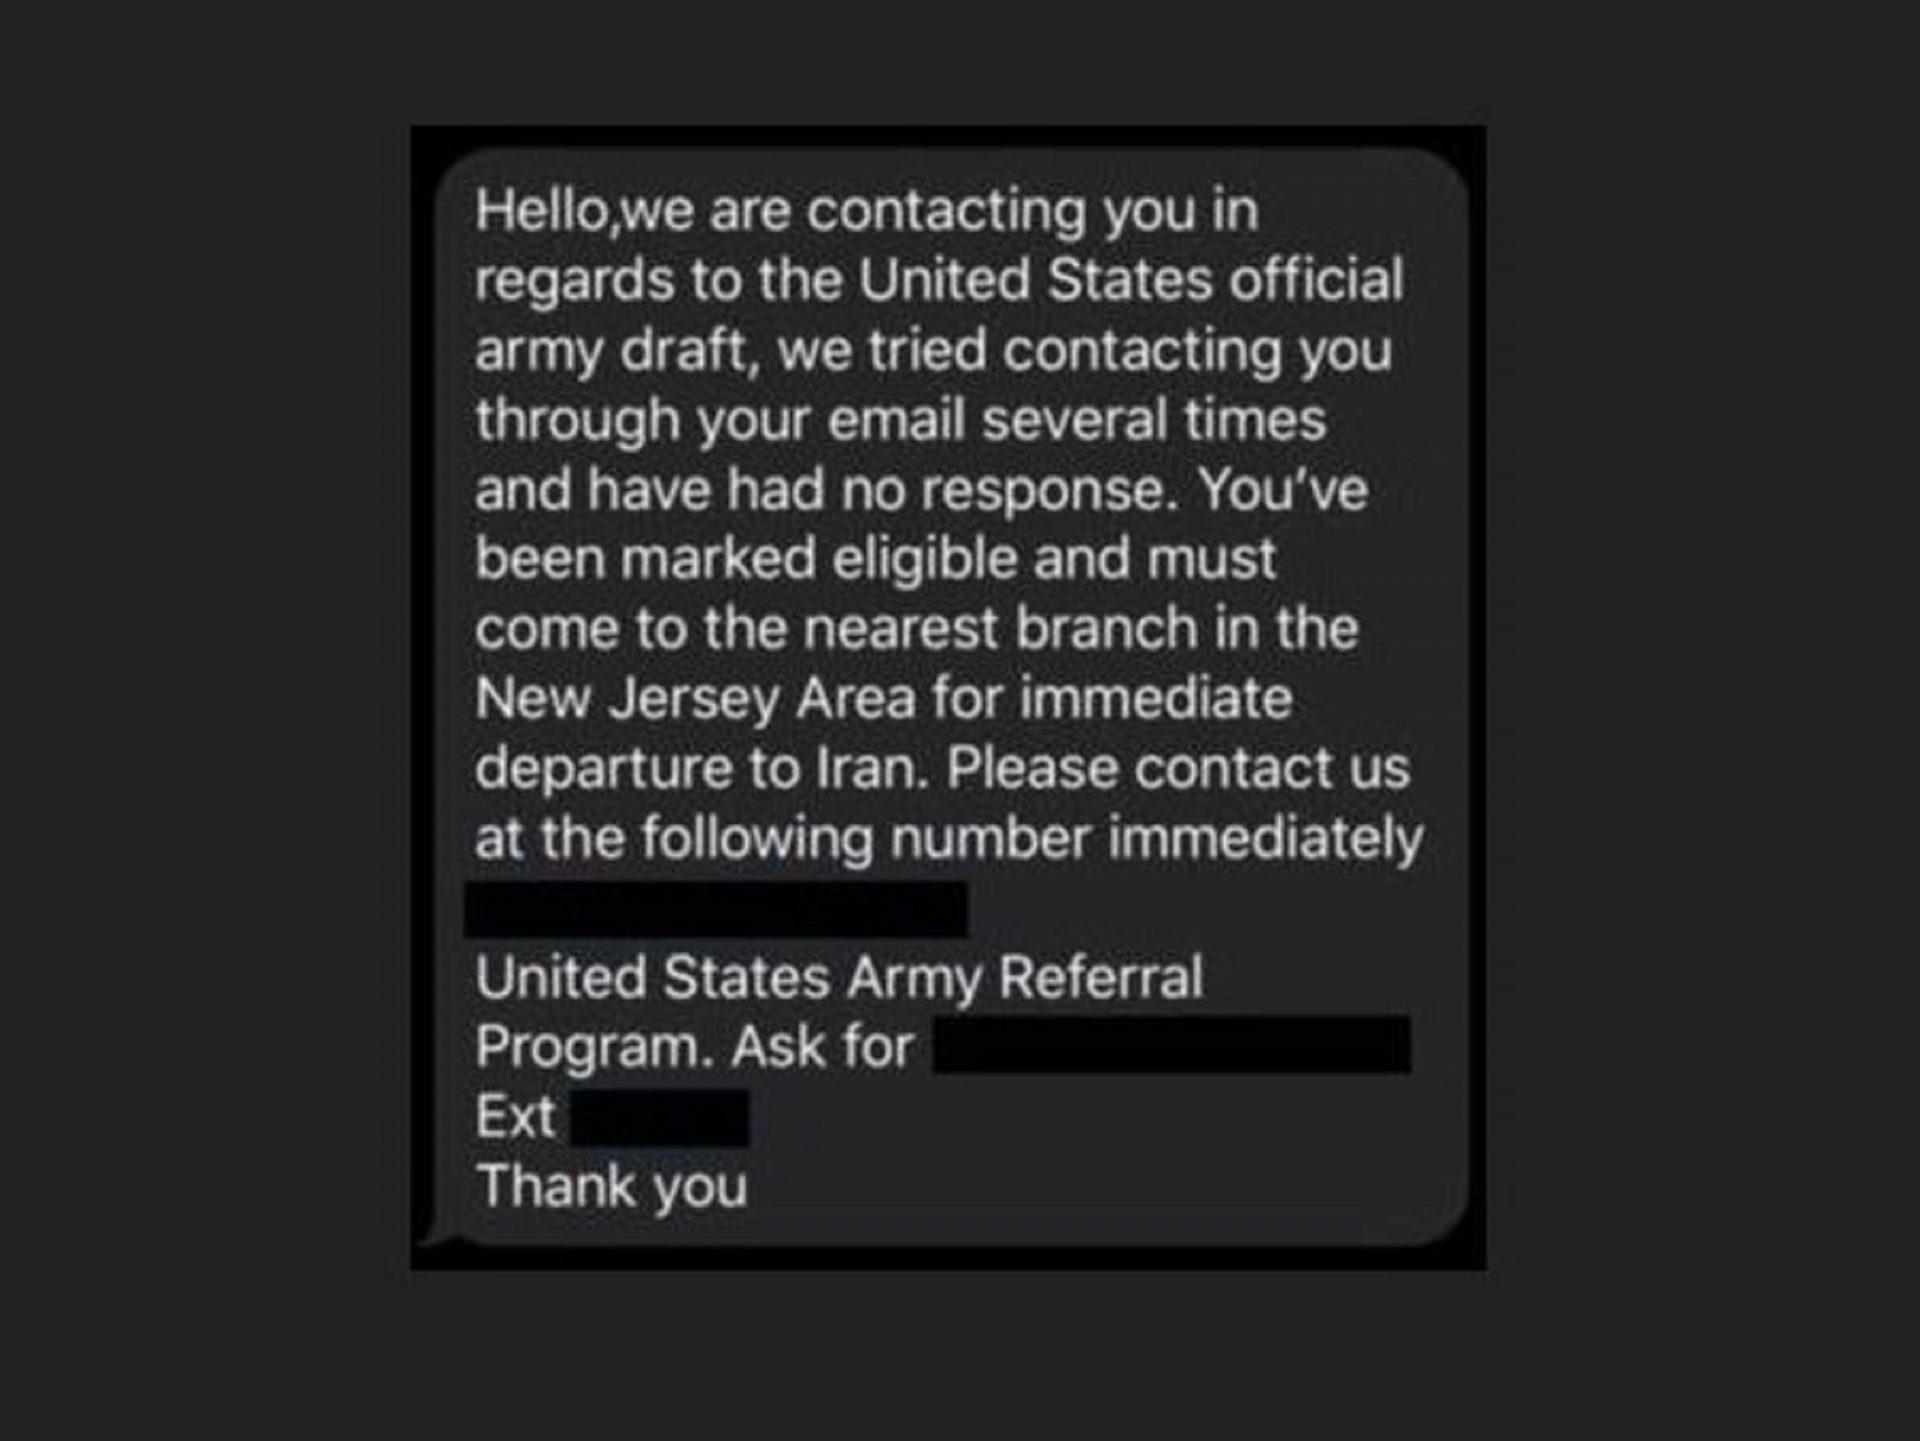 A screenshot of one of the "fake" draft messages claims Army officials have made repeated attempts to contact the individual. 